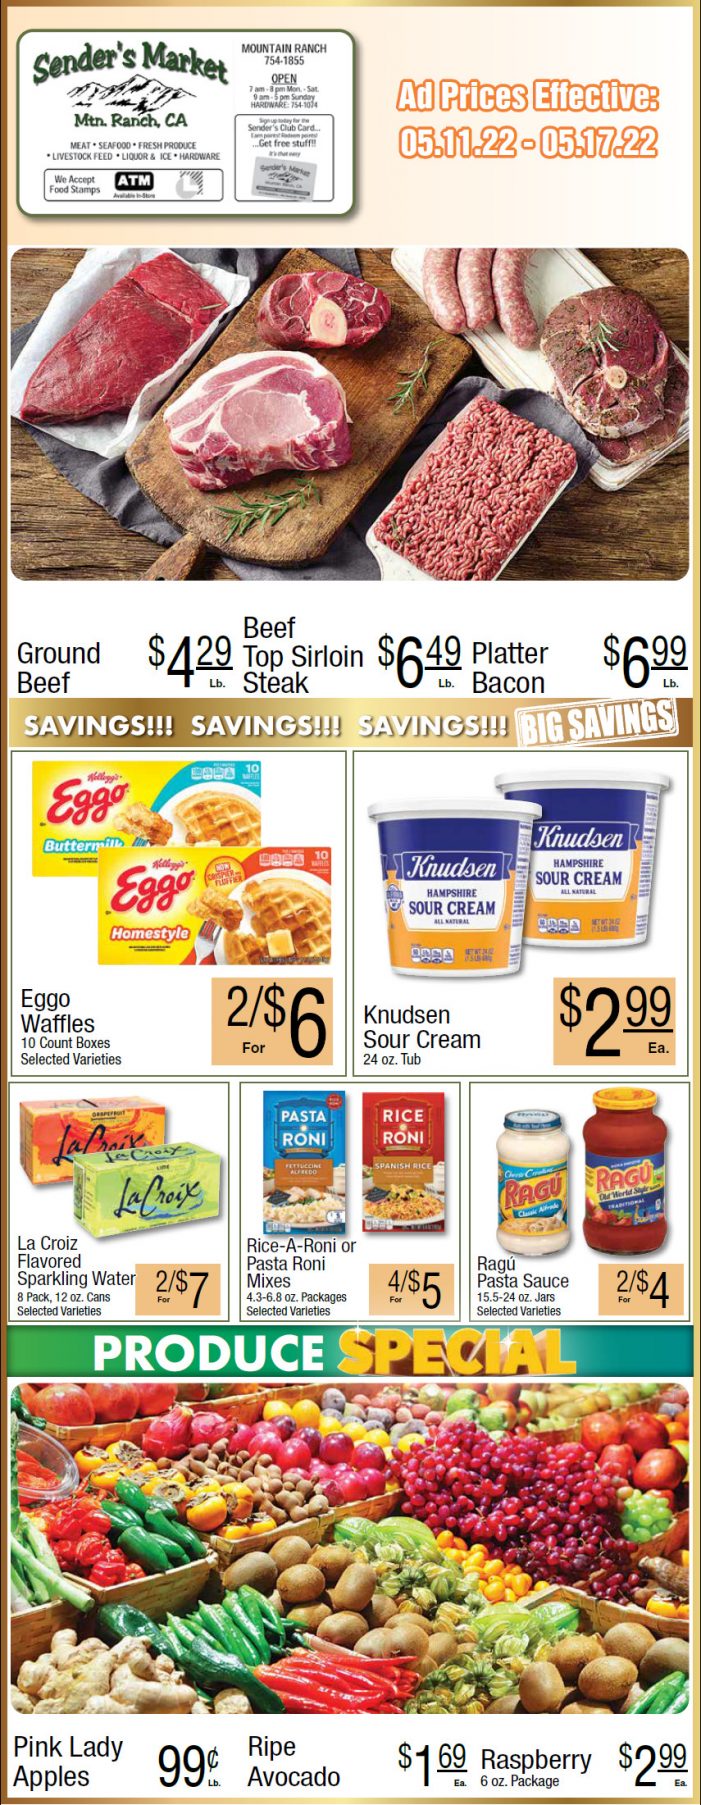 Sender’s Market Weekly Ad & Grocery Specials Through May 17th! Shop Local & Save!